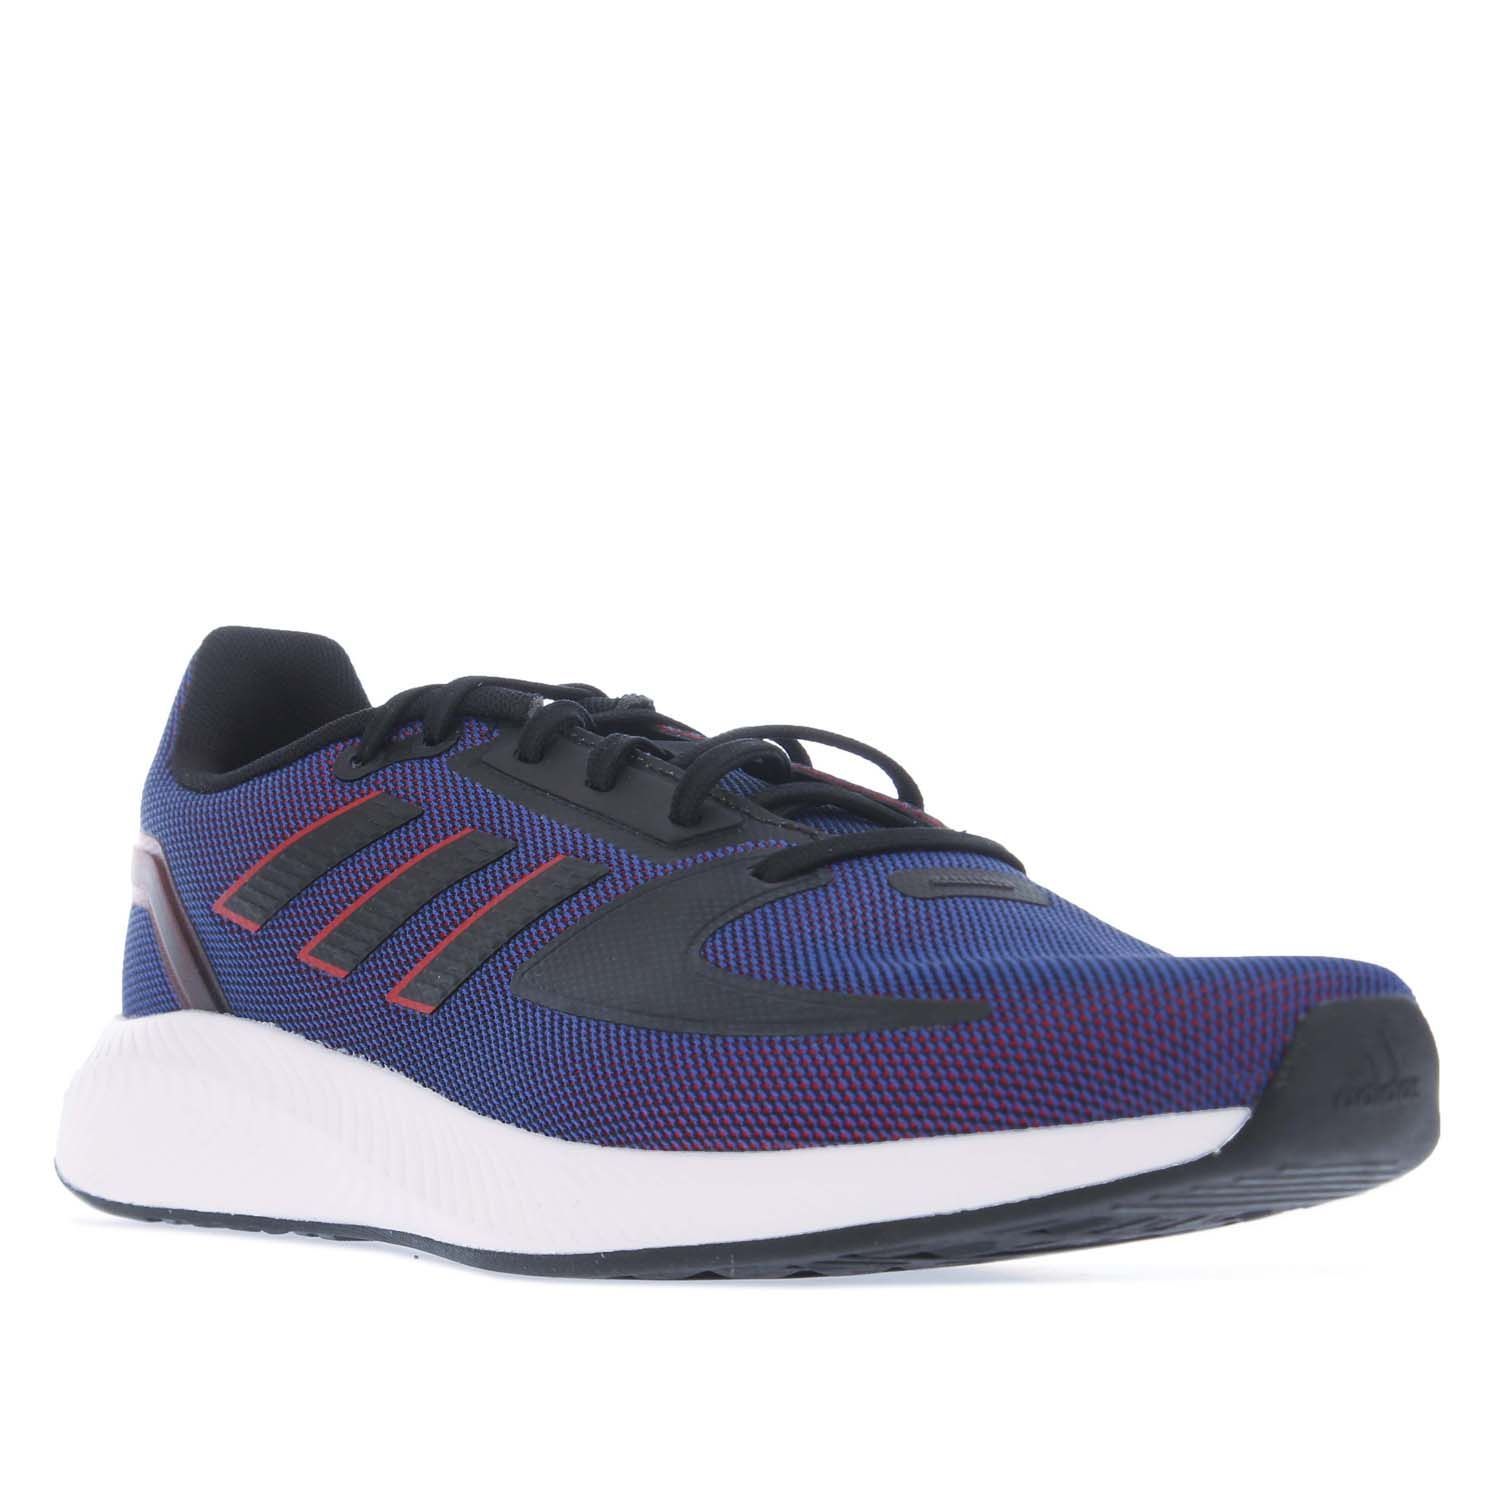 Mens adidas Runfalcon 2.0 Running Shoes in purple.- Sandwich mesh upper. - Lace closure.- Regular fit.- adidas logo on the tongue and heel.- Padded ankle collar. - Lightweight feel.- EVA midsole.- Supportive no-sew heel.- Durable outsole.- Textile and Synthetic upper  Textile lining  Synthetic sole. - Ref.: FY9627